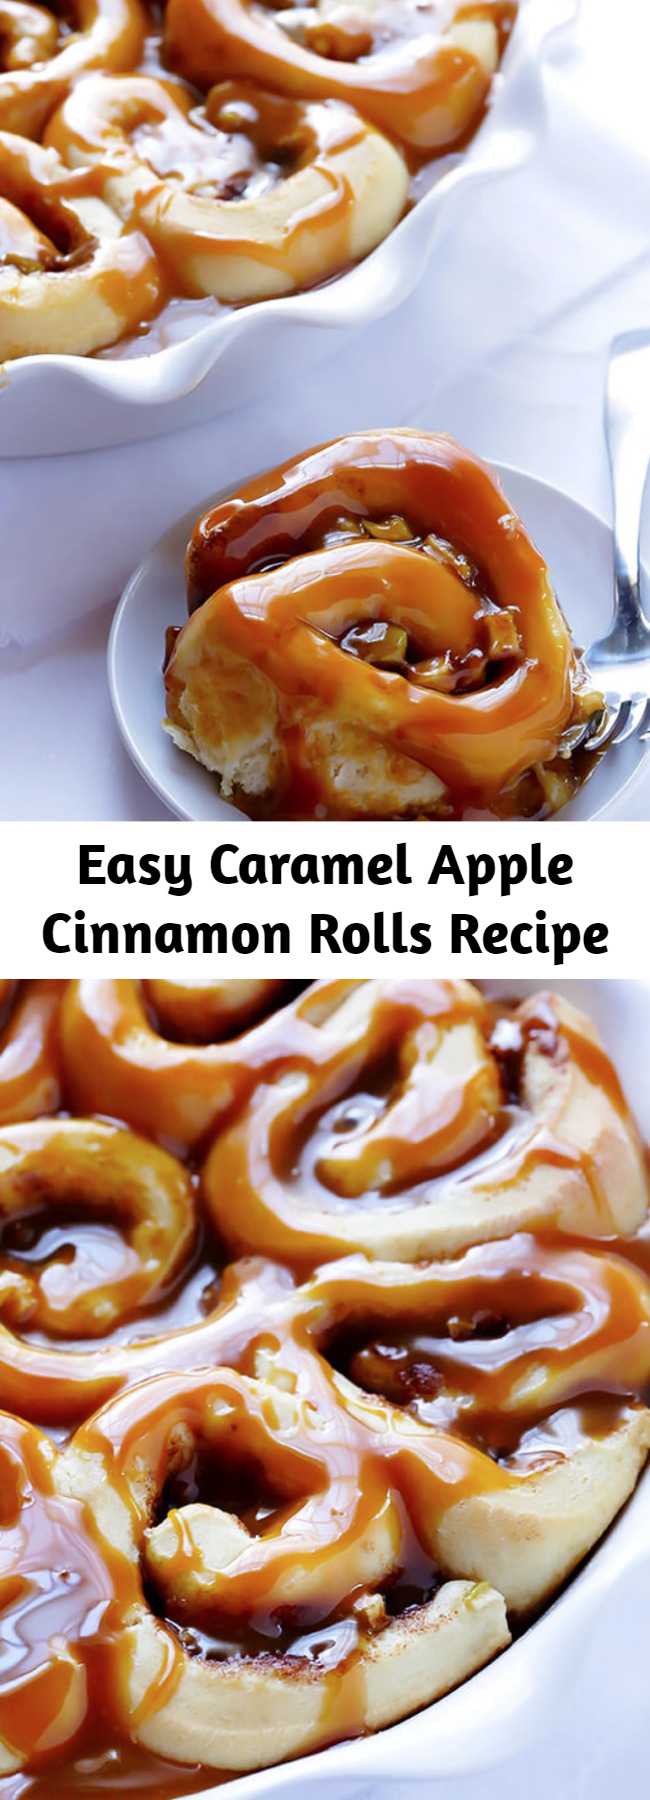 Easy Caramel Apple Cinnamon Rolls Recipe - These caramel apple cinnamon rolls are filled with delicious sweet caramel and tart apples — the perfect combination! Made in 1 hour, and will send you into caramel apple heaven.